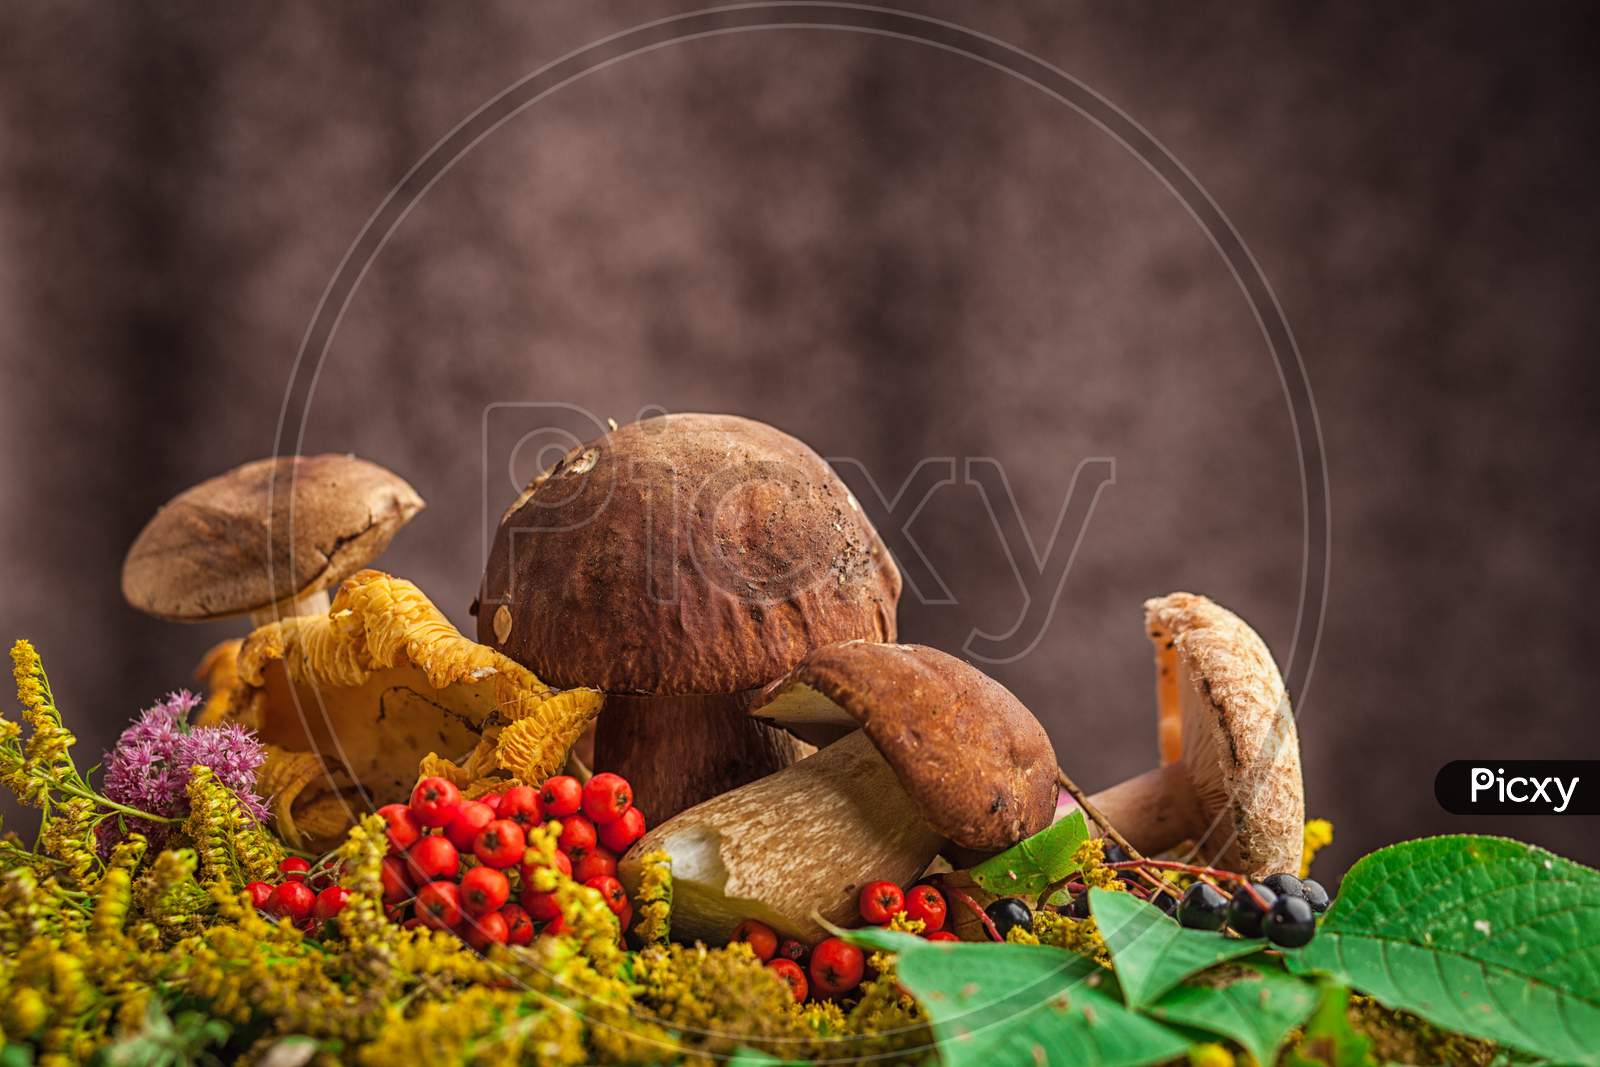 A Beautiful Still-Life From Natural Large White Mushrooms, Orange Leaves Of Mountain Ash, Green Leaves, Paportnikov And Other Gifts Of The Forest. Autumn Still Life Of Mushrooms